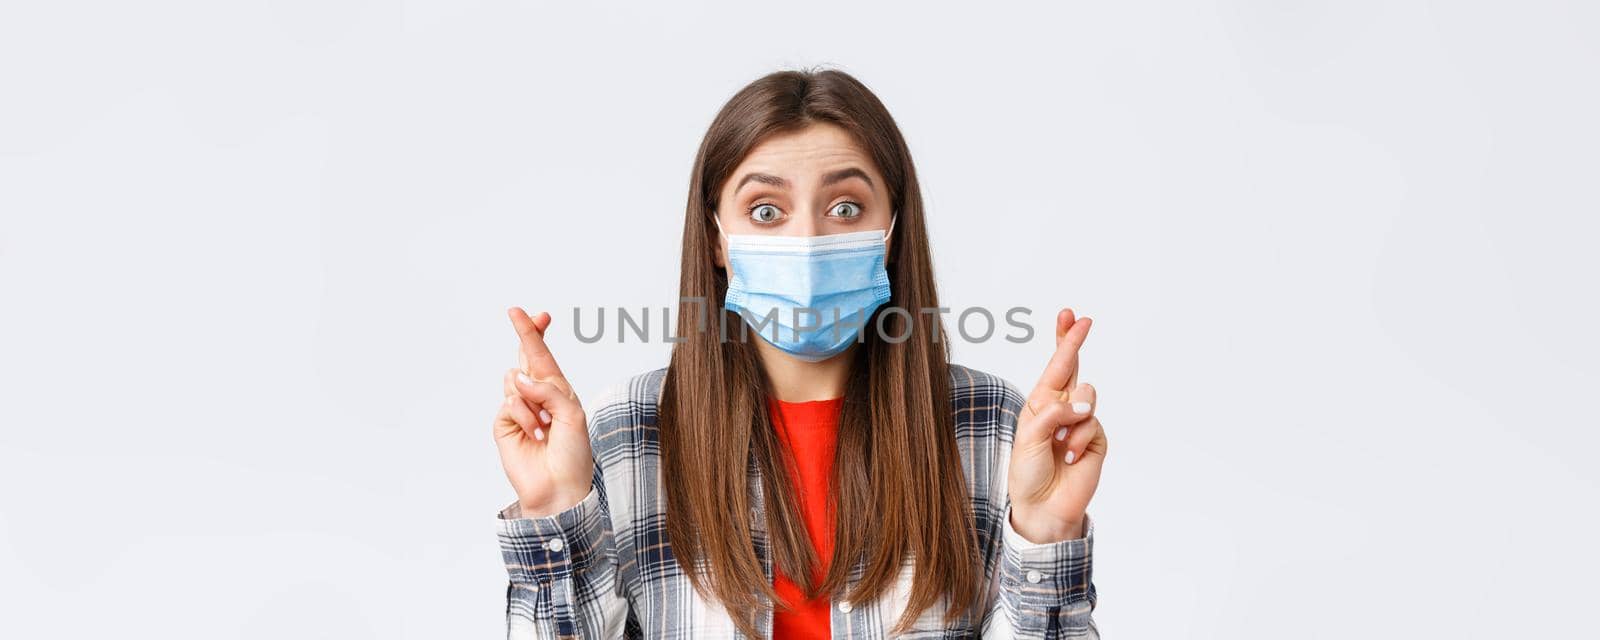 Coronavirus outbreak, leisure on quarantine, social distancing and emotions concept. Hopeful cute girl in medical mask anticipating good news, believe dream come true, cross fingers as making wish by Benzoix